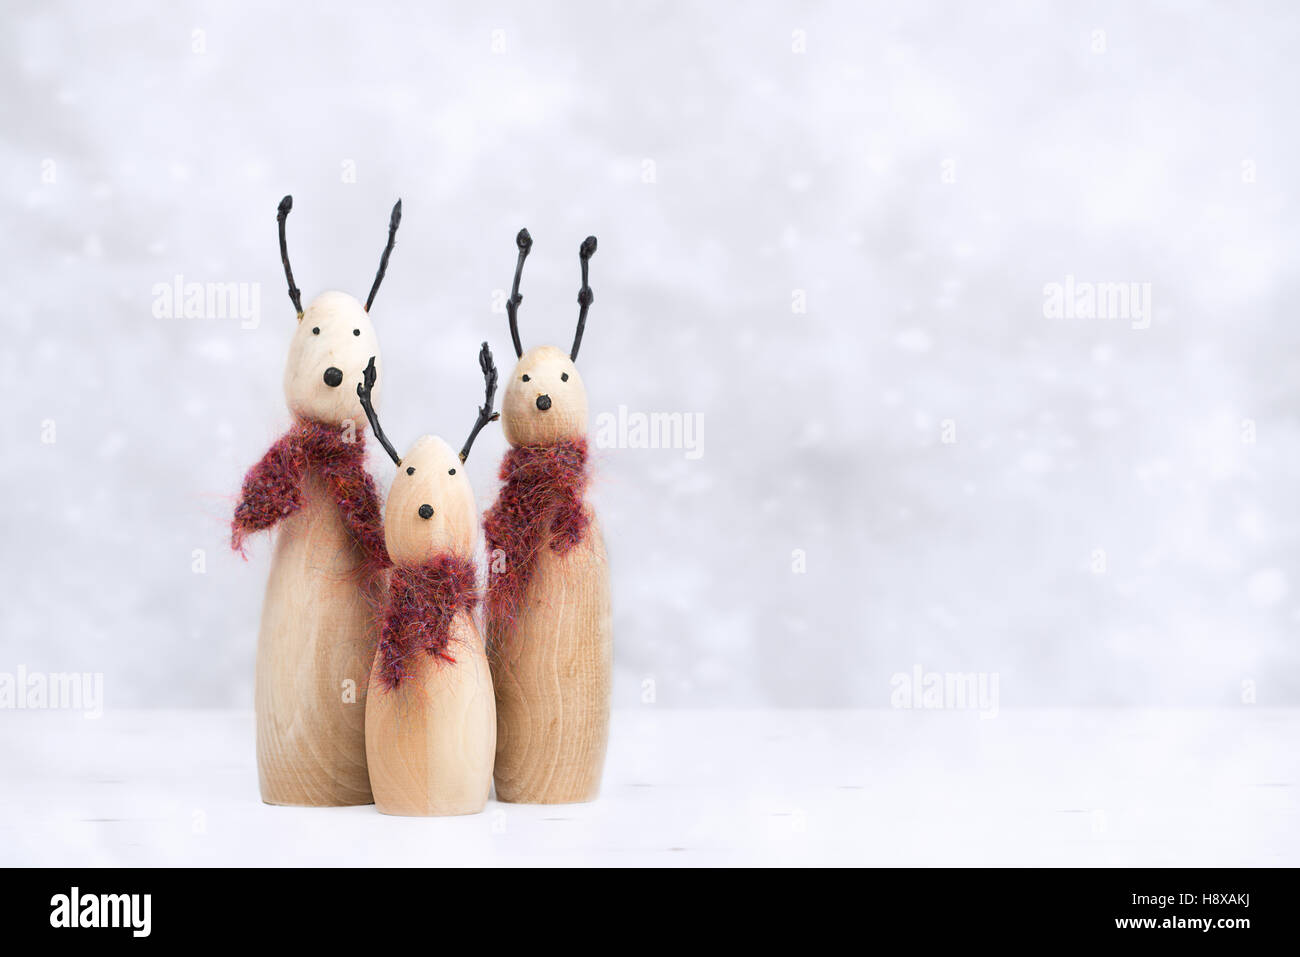 Reindeer animal figures with knitted scarves Stock Photo